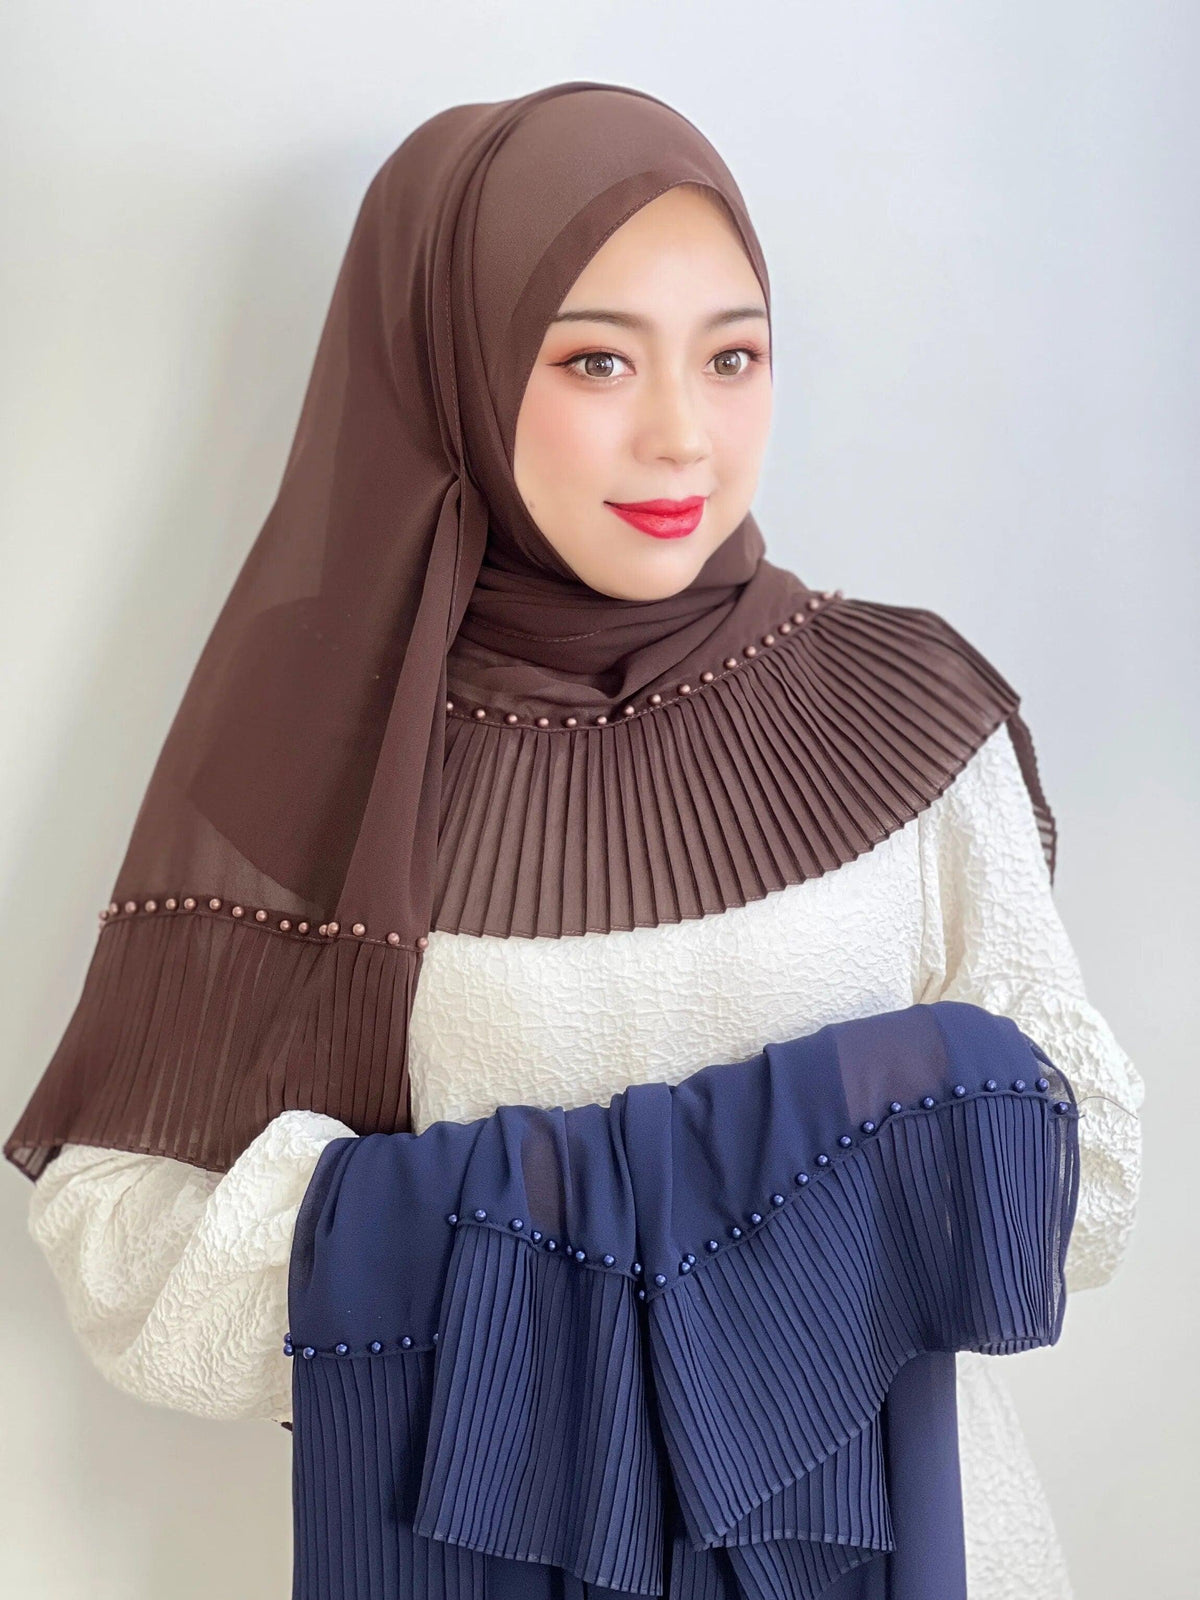 On sale - Pleated Stylish Hijab - 10 Colours - Free shipping